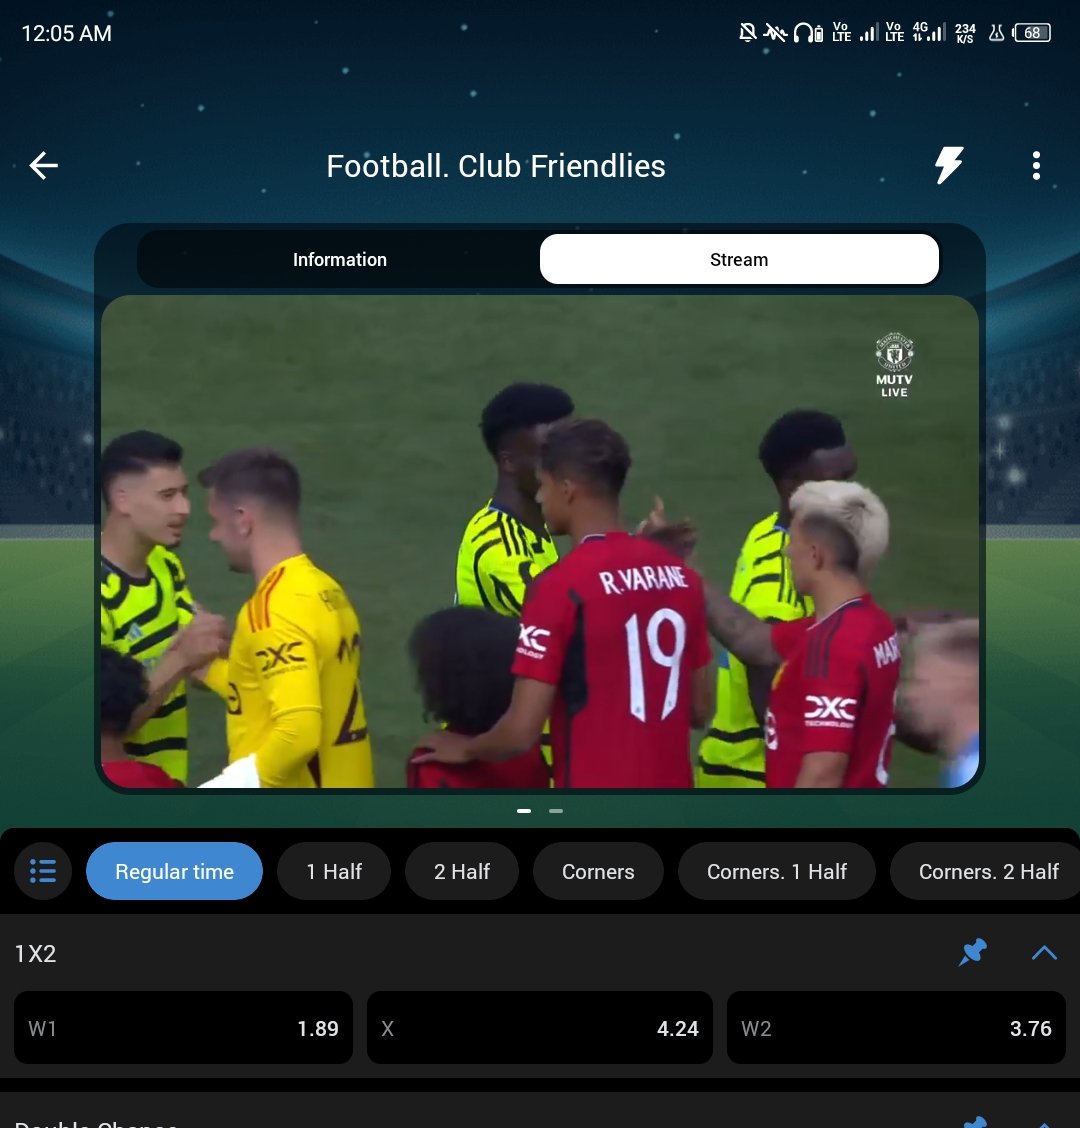 #MUNARS Link to the app https://t.co/XggqWtxJoC…, download the app 1xbet app, just click on the arsenal Manchester united game and enjoy watching sana rice and onana and varane play for free,
While atvit follow me for more life hacks https://t.co/b1Stm6NosS